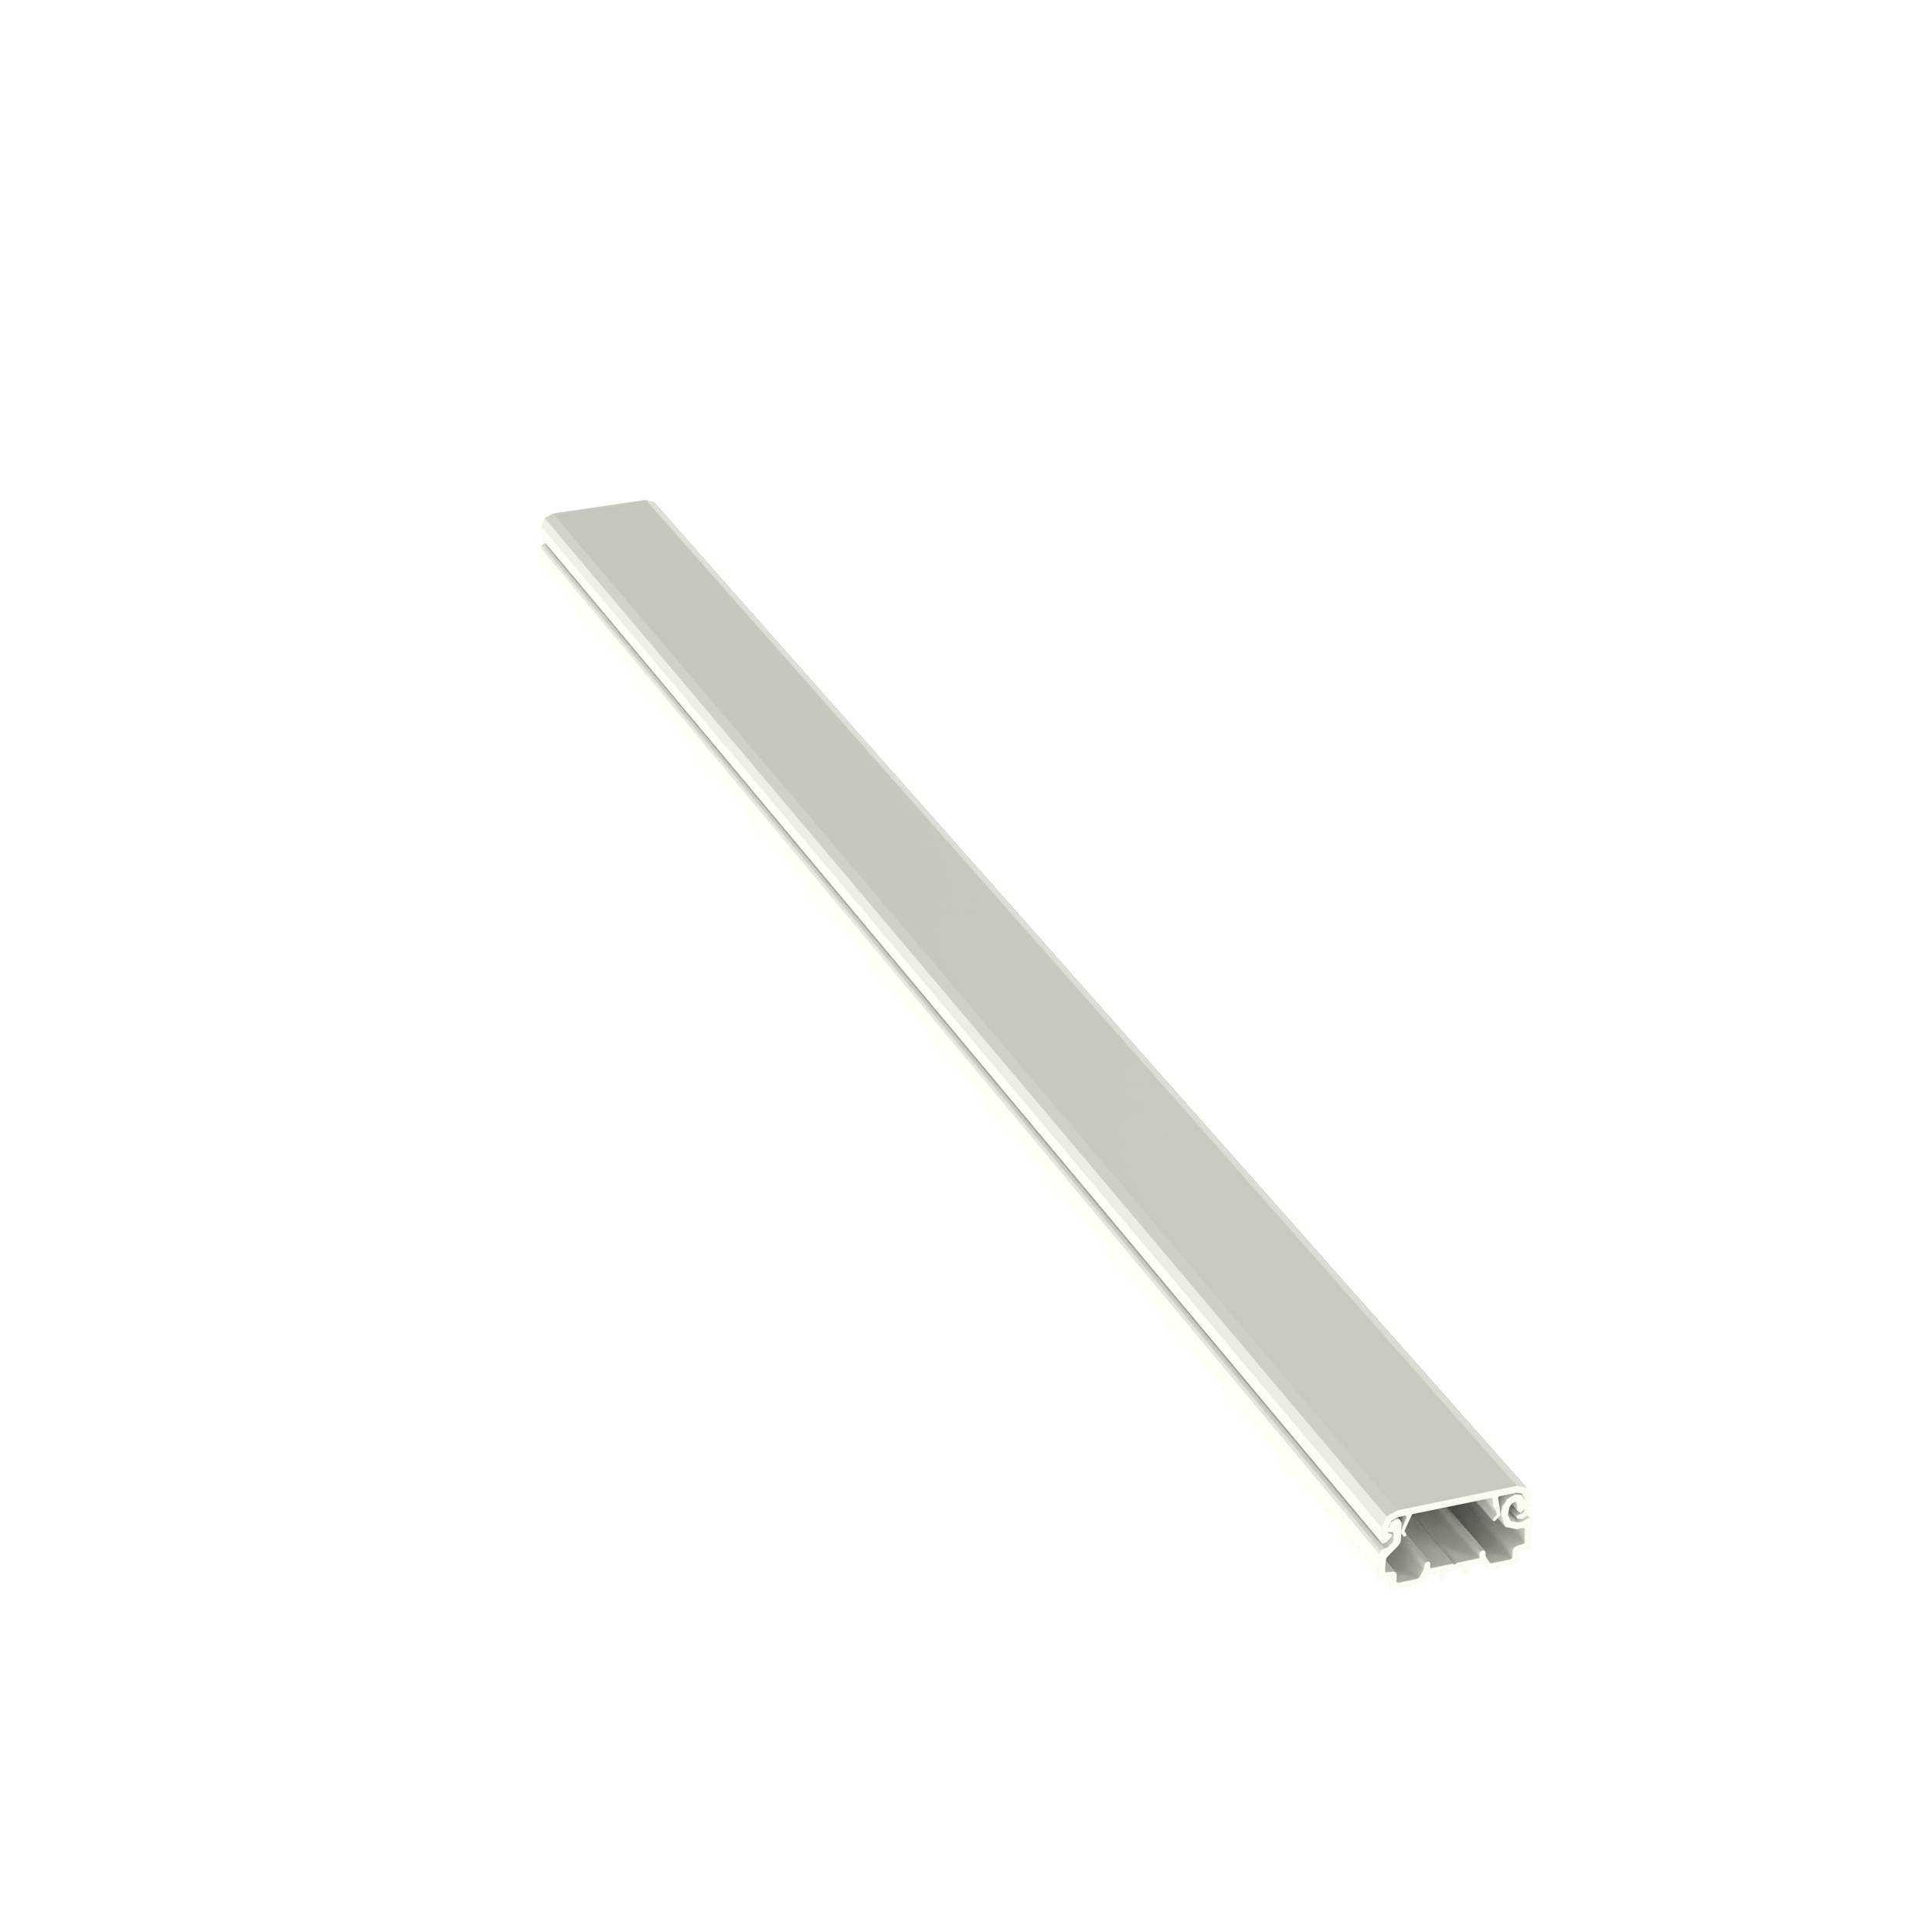 Panduit® Pan-Way® LDPH3IW6-A Power Rated Channel Tamper-Resistant Non-Metallic Raceway, 6 ft L x 0.77 in W x 0.41 in H, 1 Channel, Rigid PVC